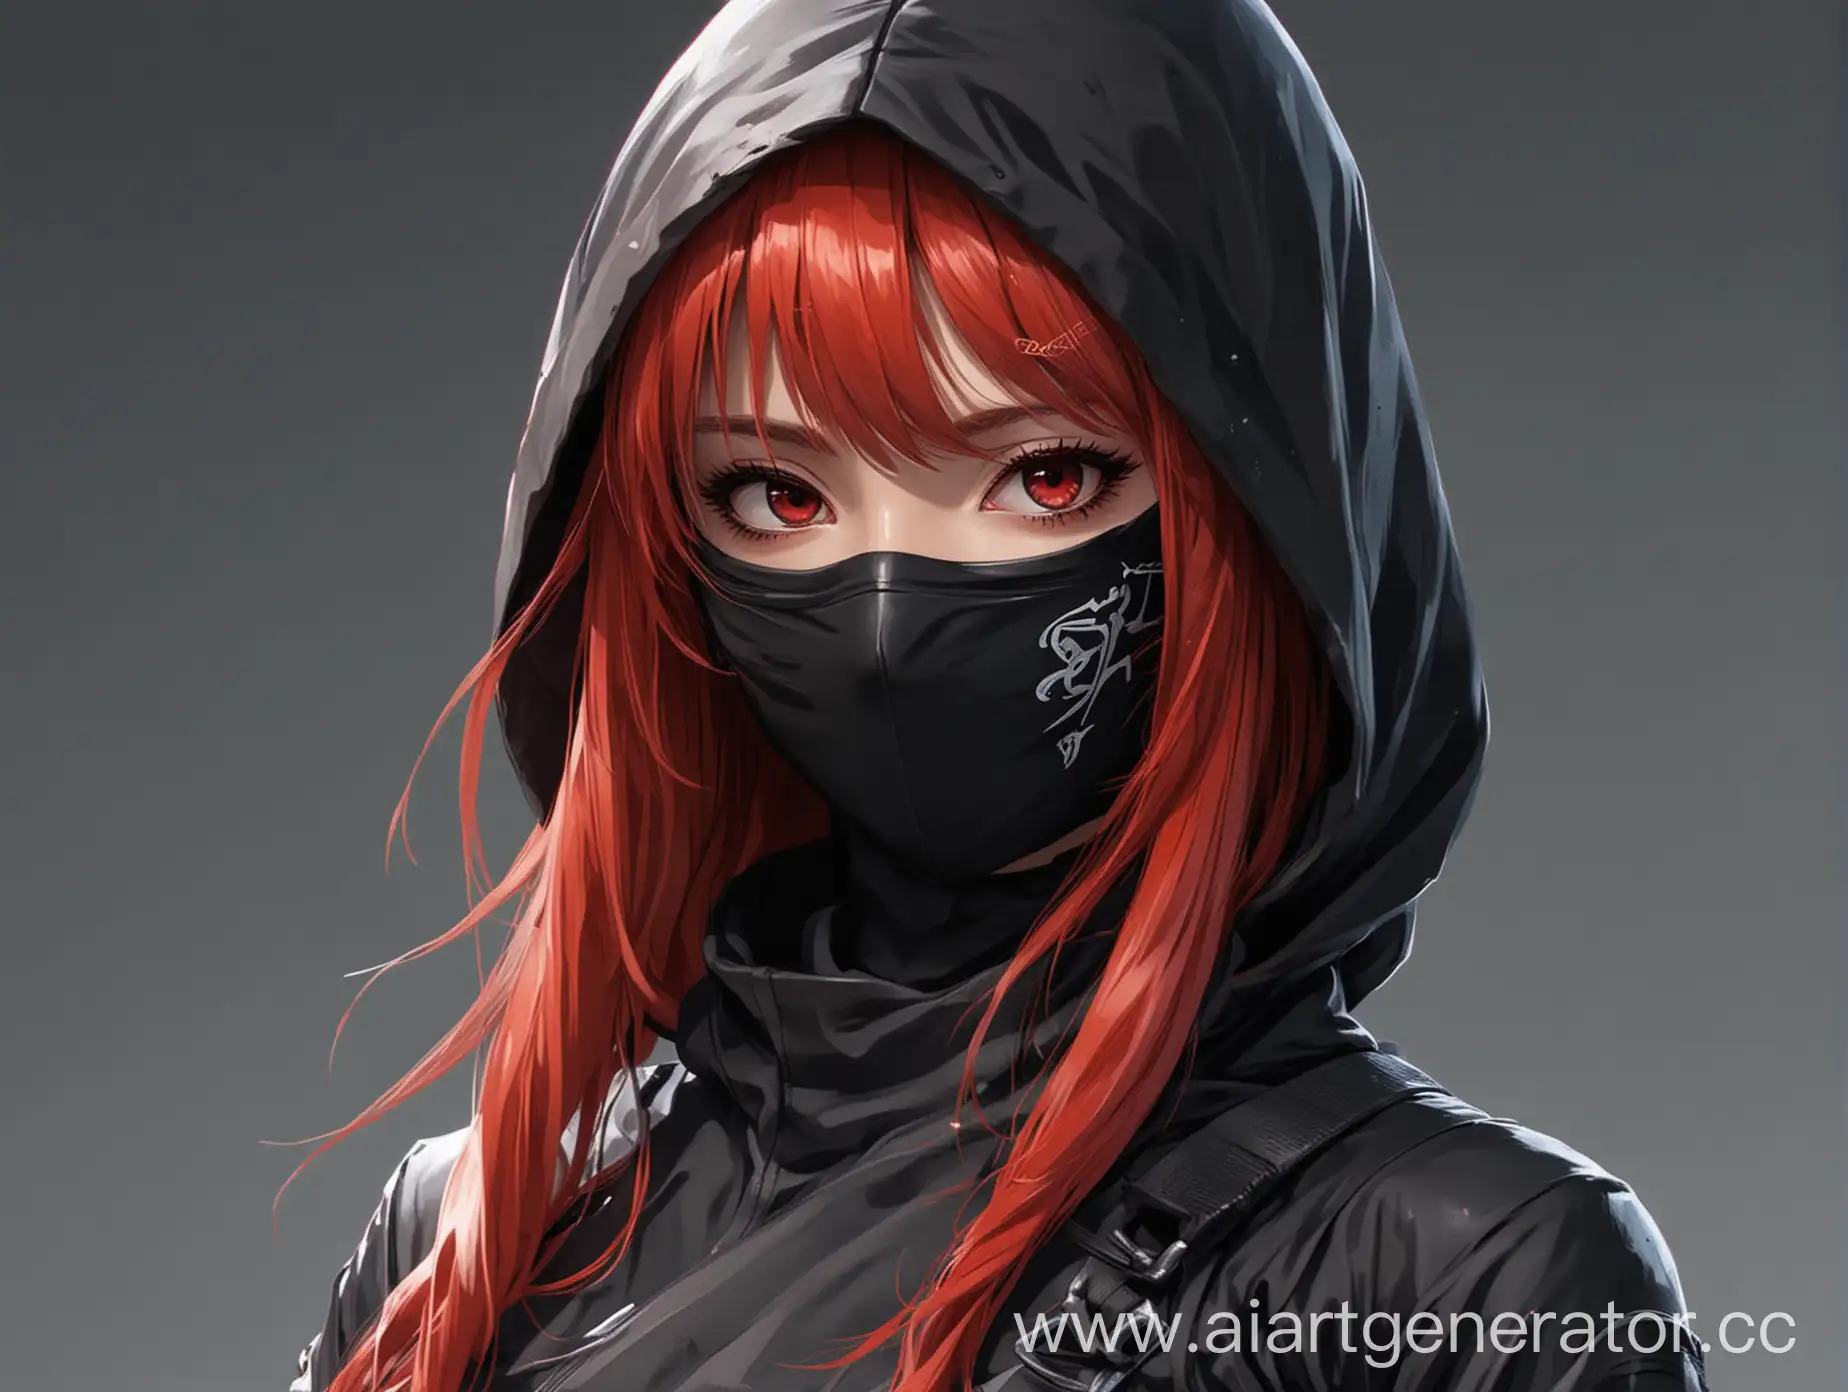 Anime-Girl-in-Black-Ninja-Suit-with-Long-Red-Hair